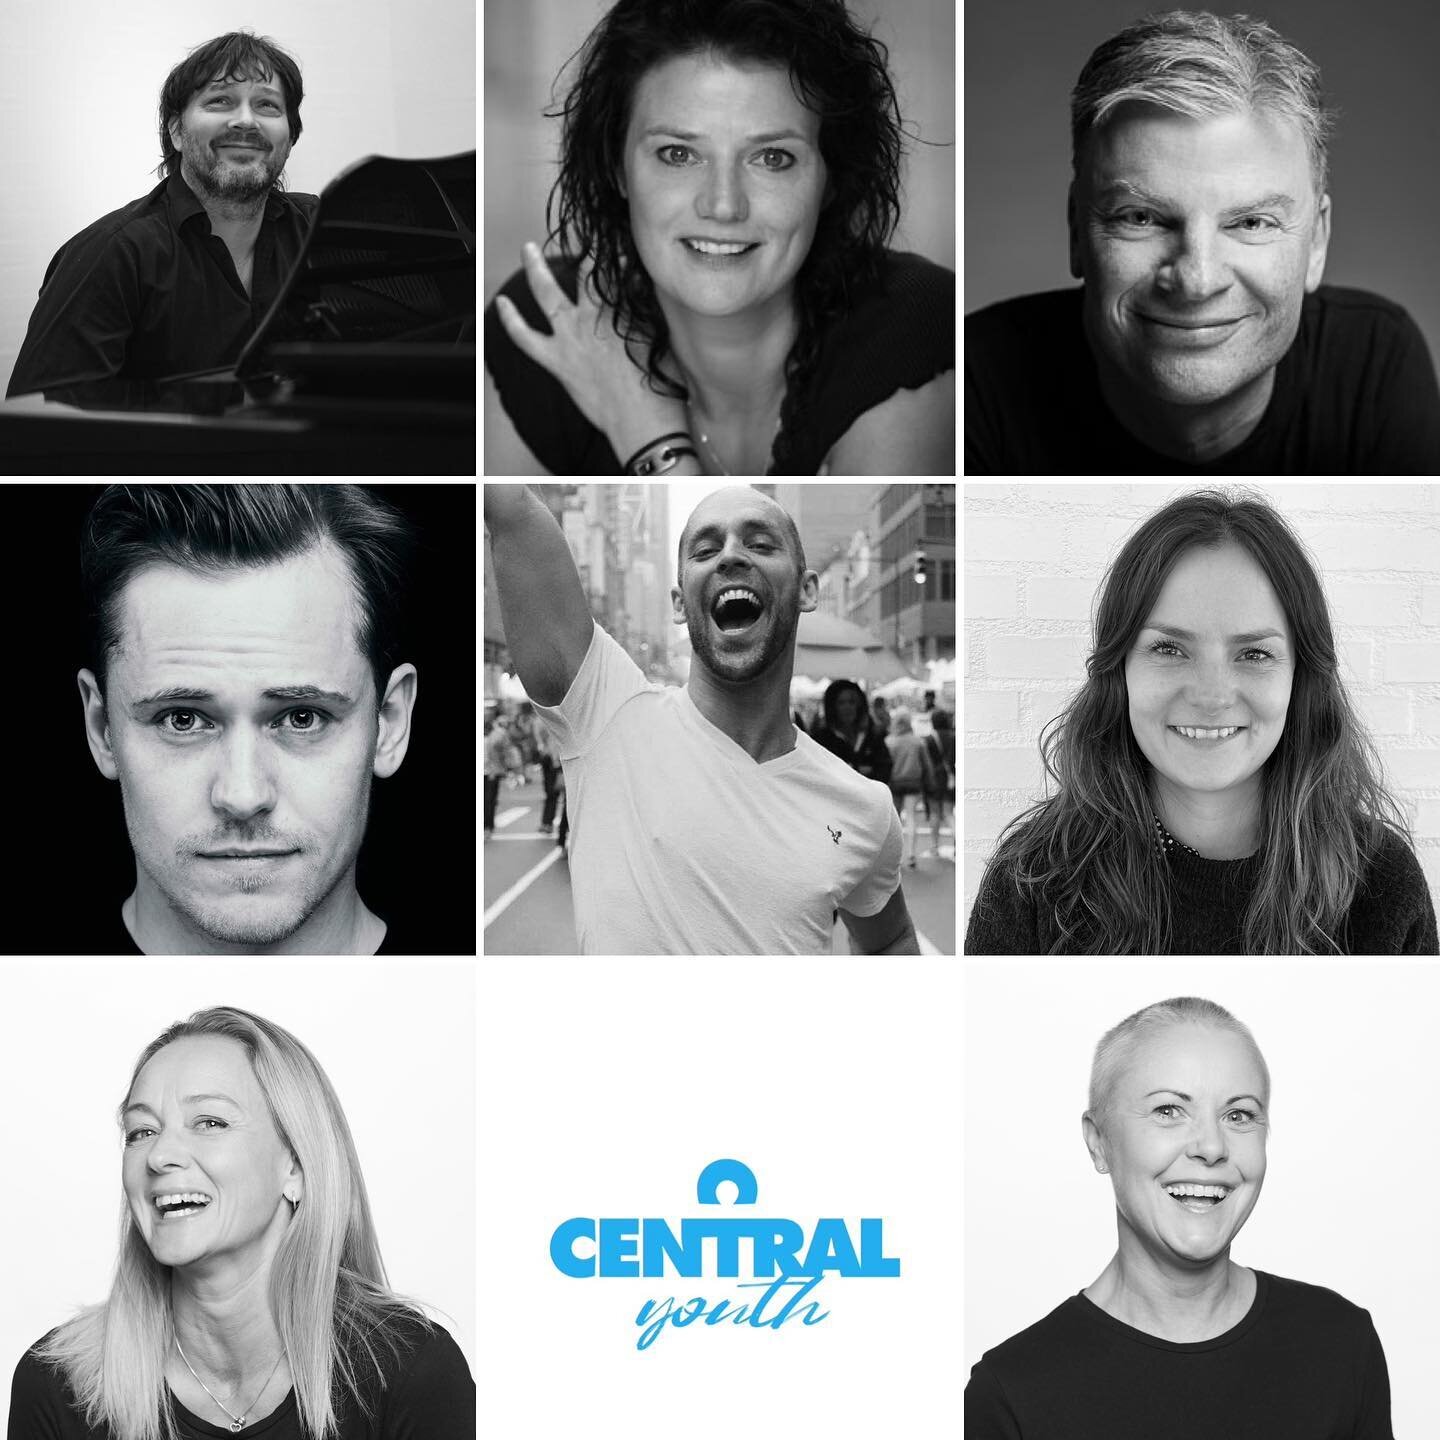 The Central Youth Team !
Summer is almost over but we are excited to start up Central Youth on Monday 28th August.
You can still apply !
For more information or to apply now click on the link below.
https://www.centralschool.dk/youth-apply-now
#centr